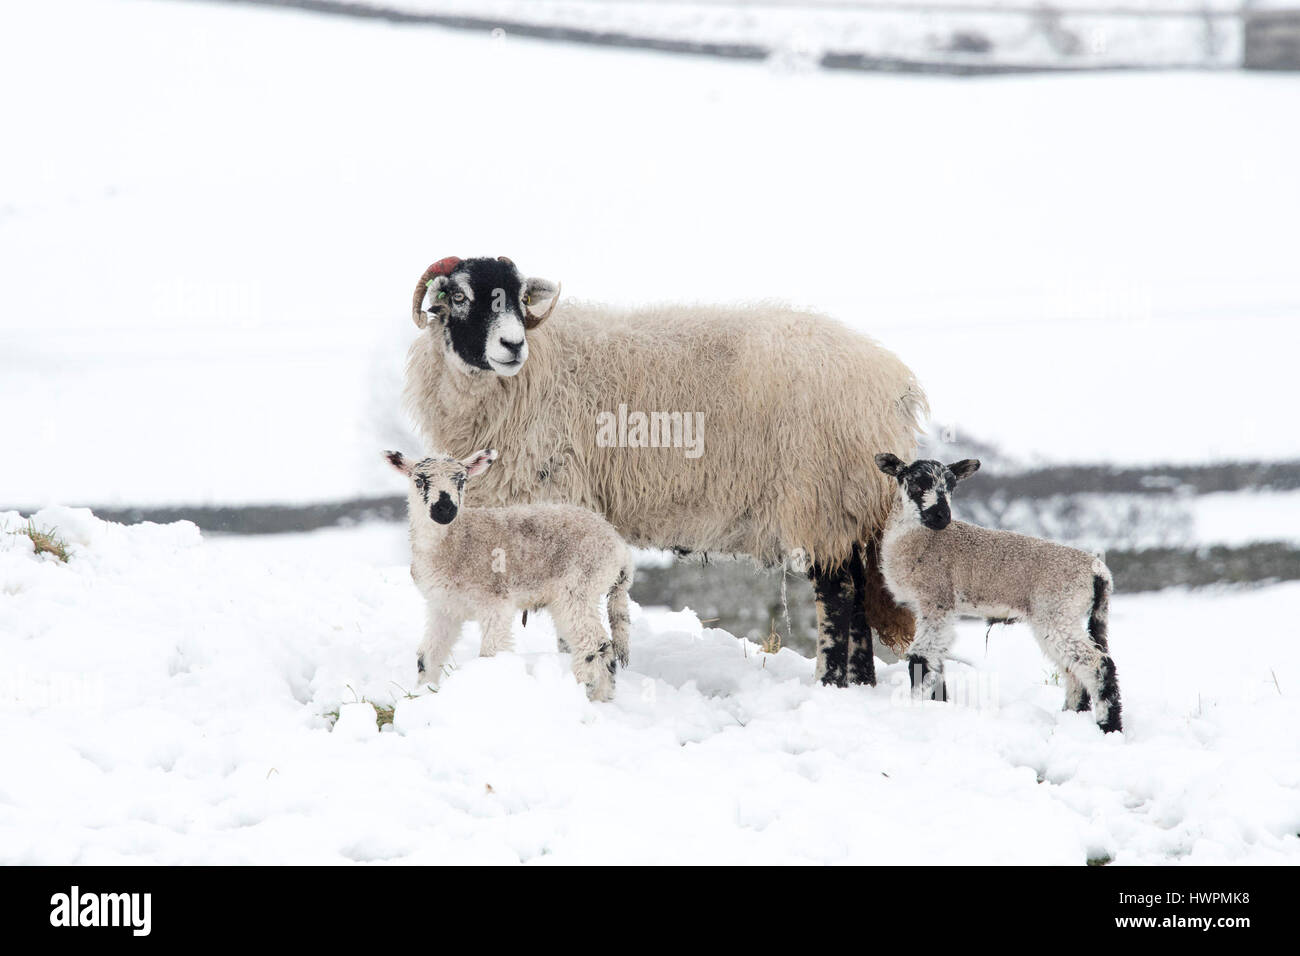 Wensleydale, UK. 22nd Mar, 2017. Swaledale ewes with mule lambs in Wensleydale woke up to a covering of snow after a very mild winter it turned into a cold spring. Credit: Wayne HUTCHINSON/Alamy Live News Stock Photo